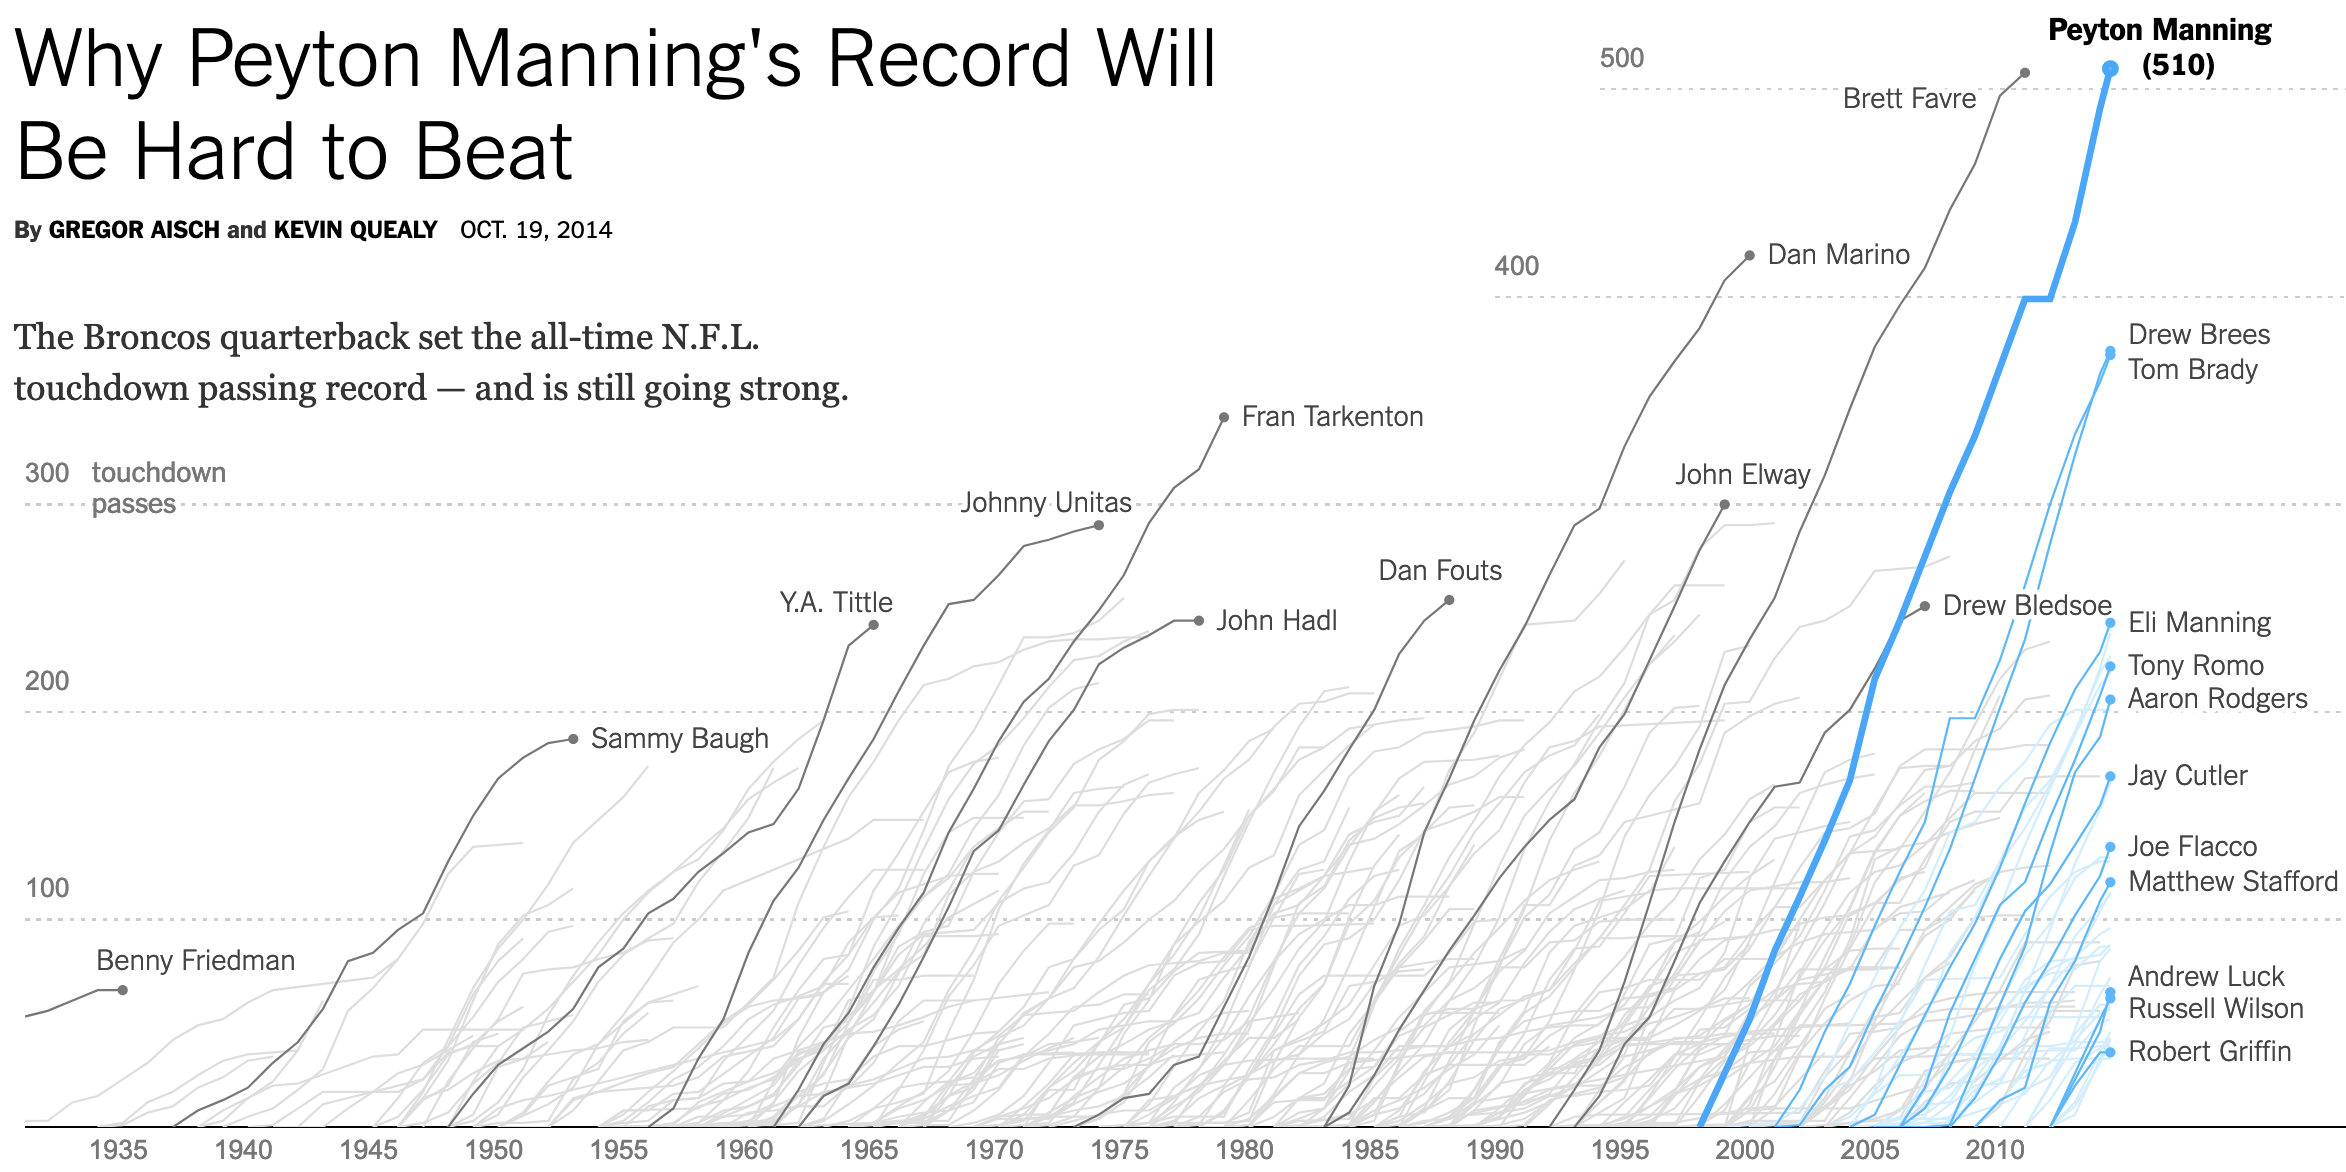 A line chart of which the title 'Why Peyton Manning's Record Will Be Hard To Beat' is moved inside the plot area